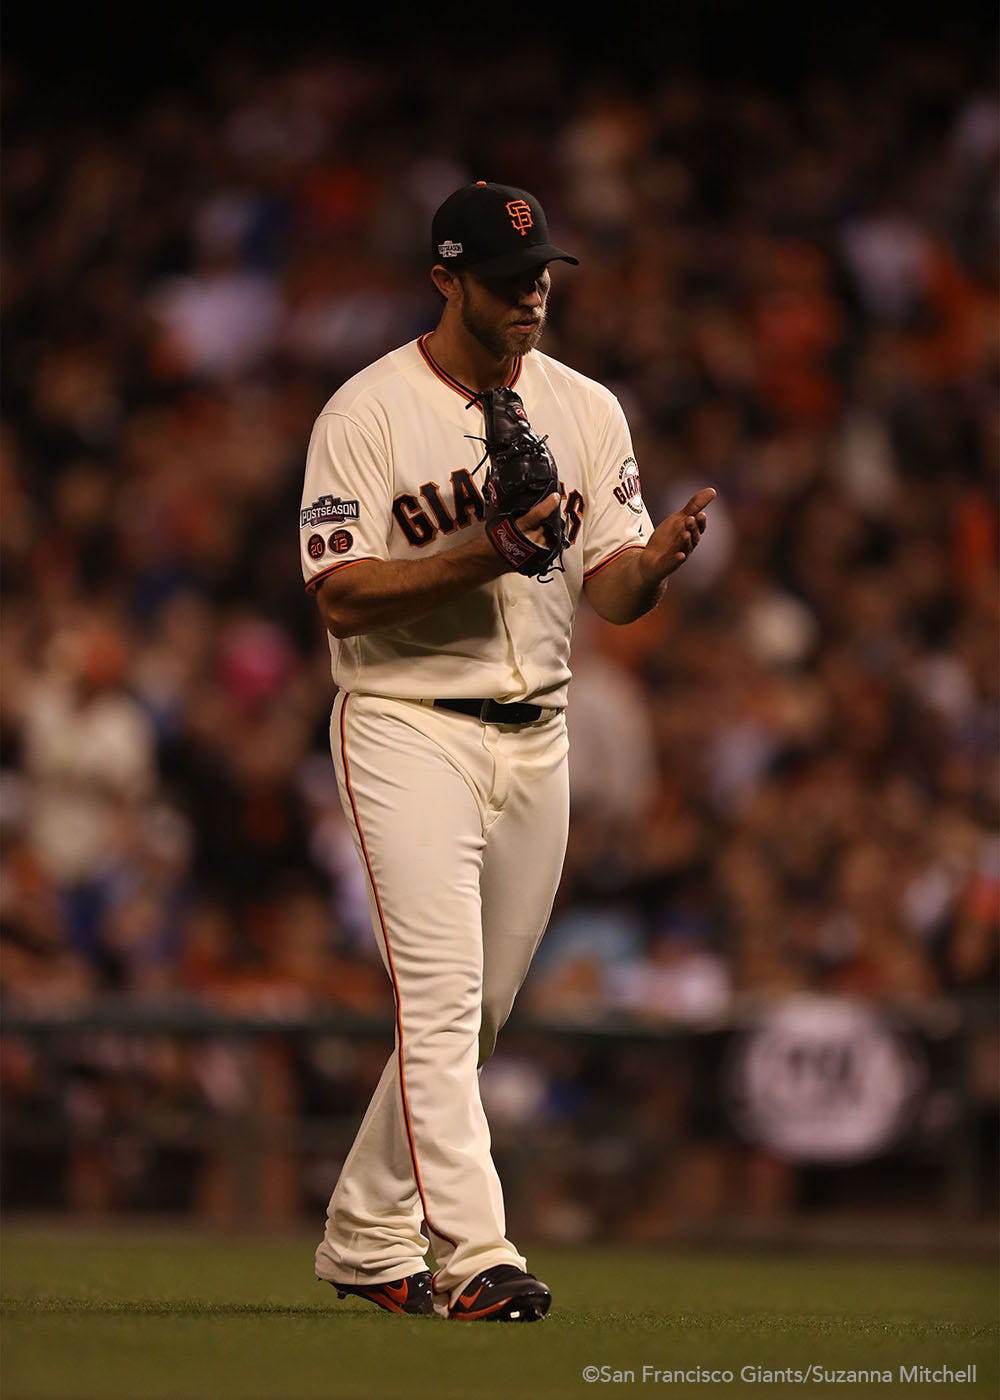 Madison Bumgarner leaves the mound after pitching during the fifth inning.